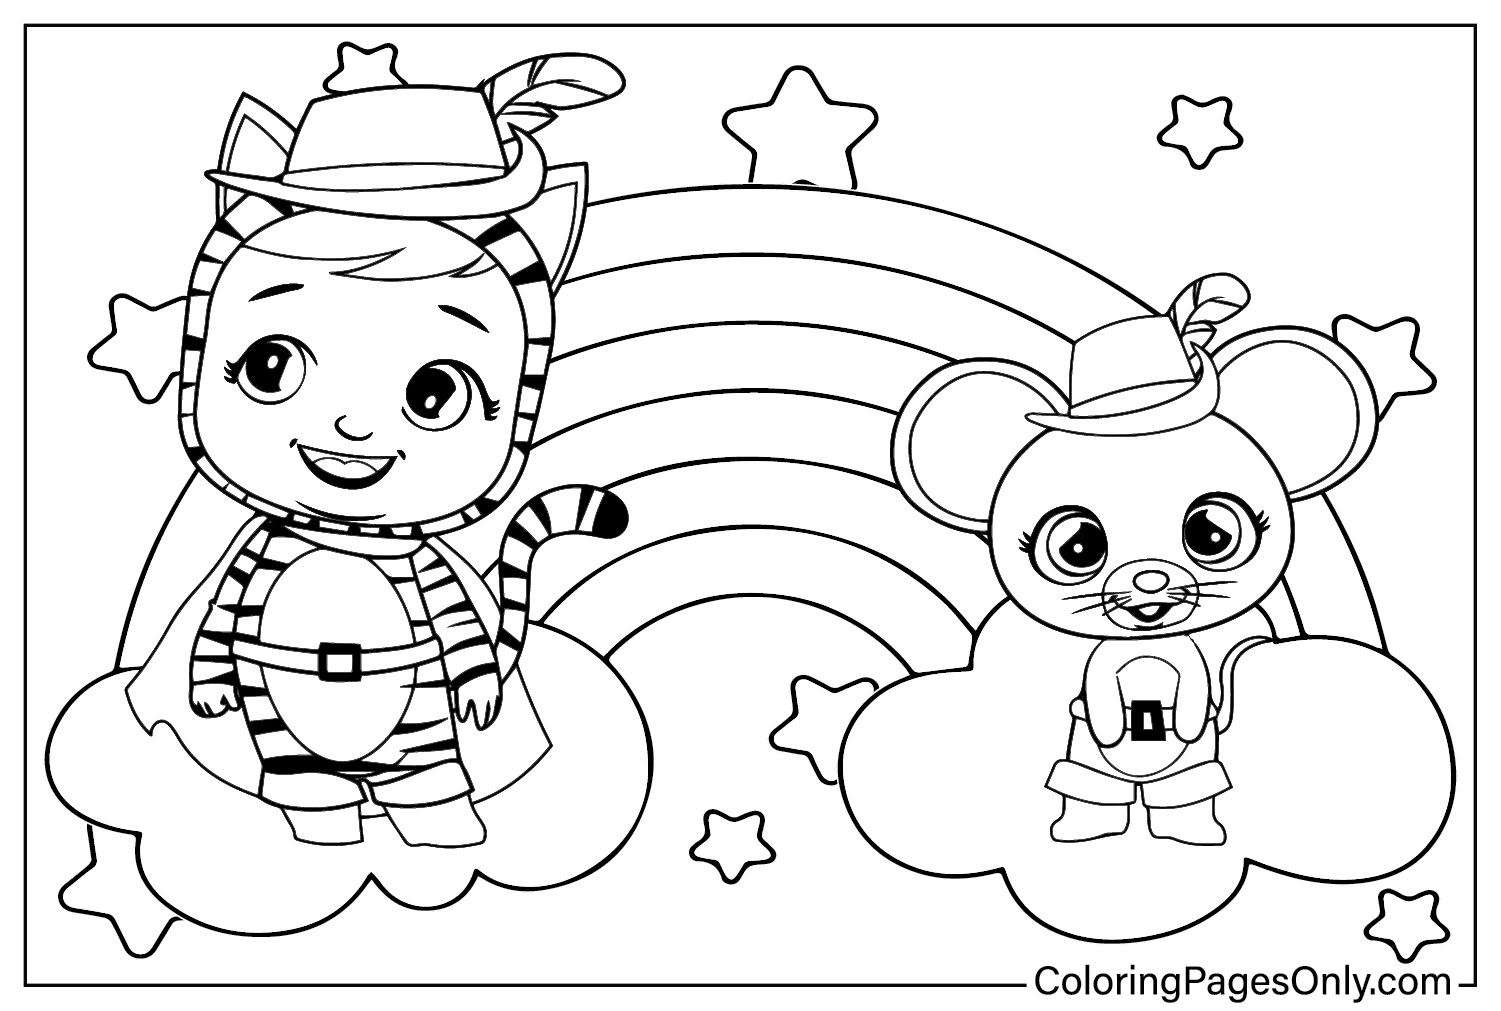 Coloring Sheet Cry Babies from Cry Babies